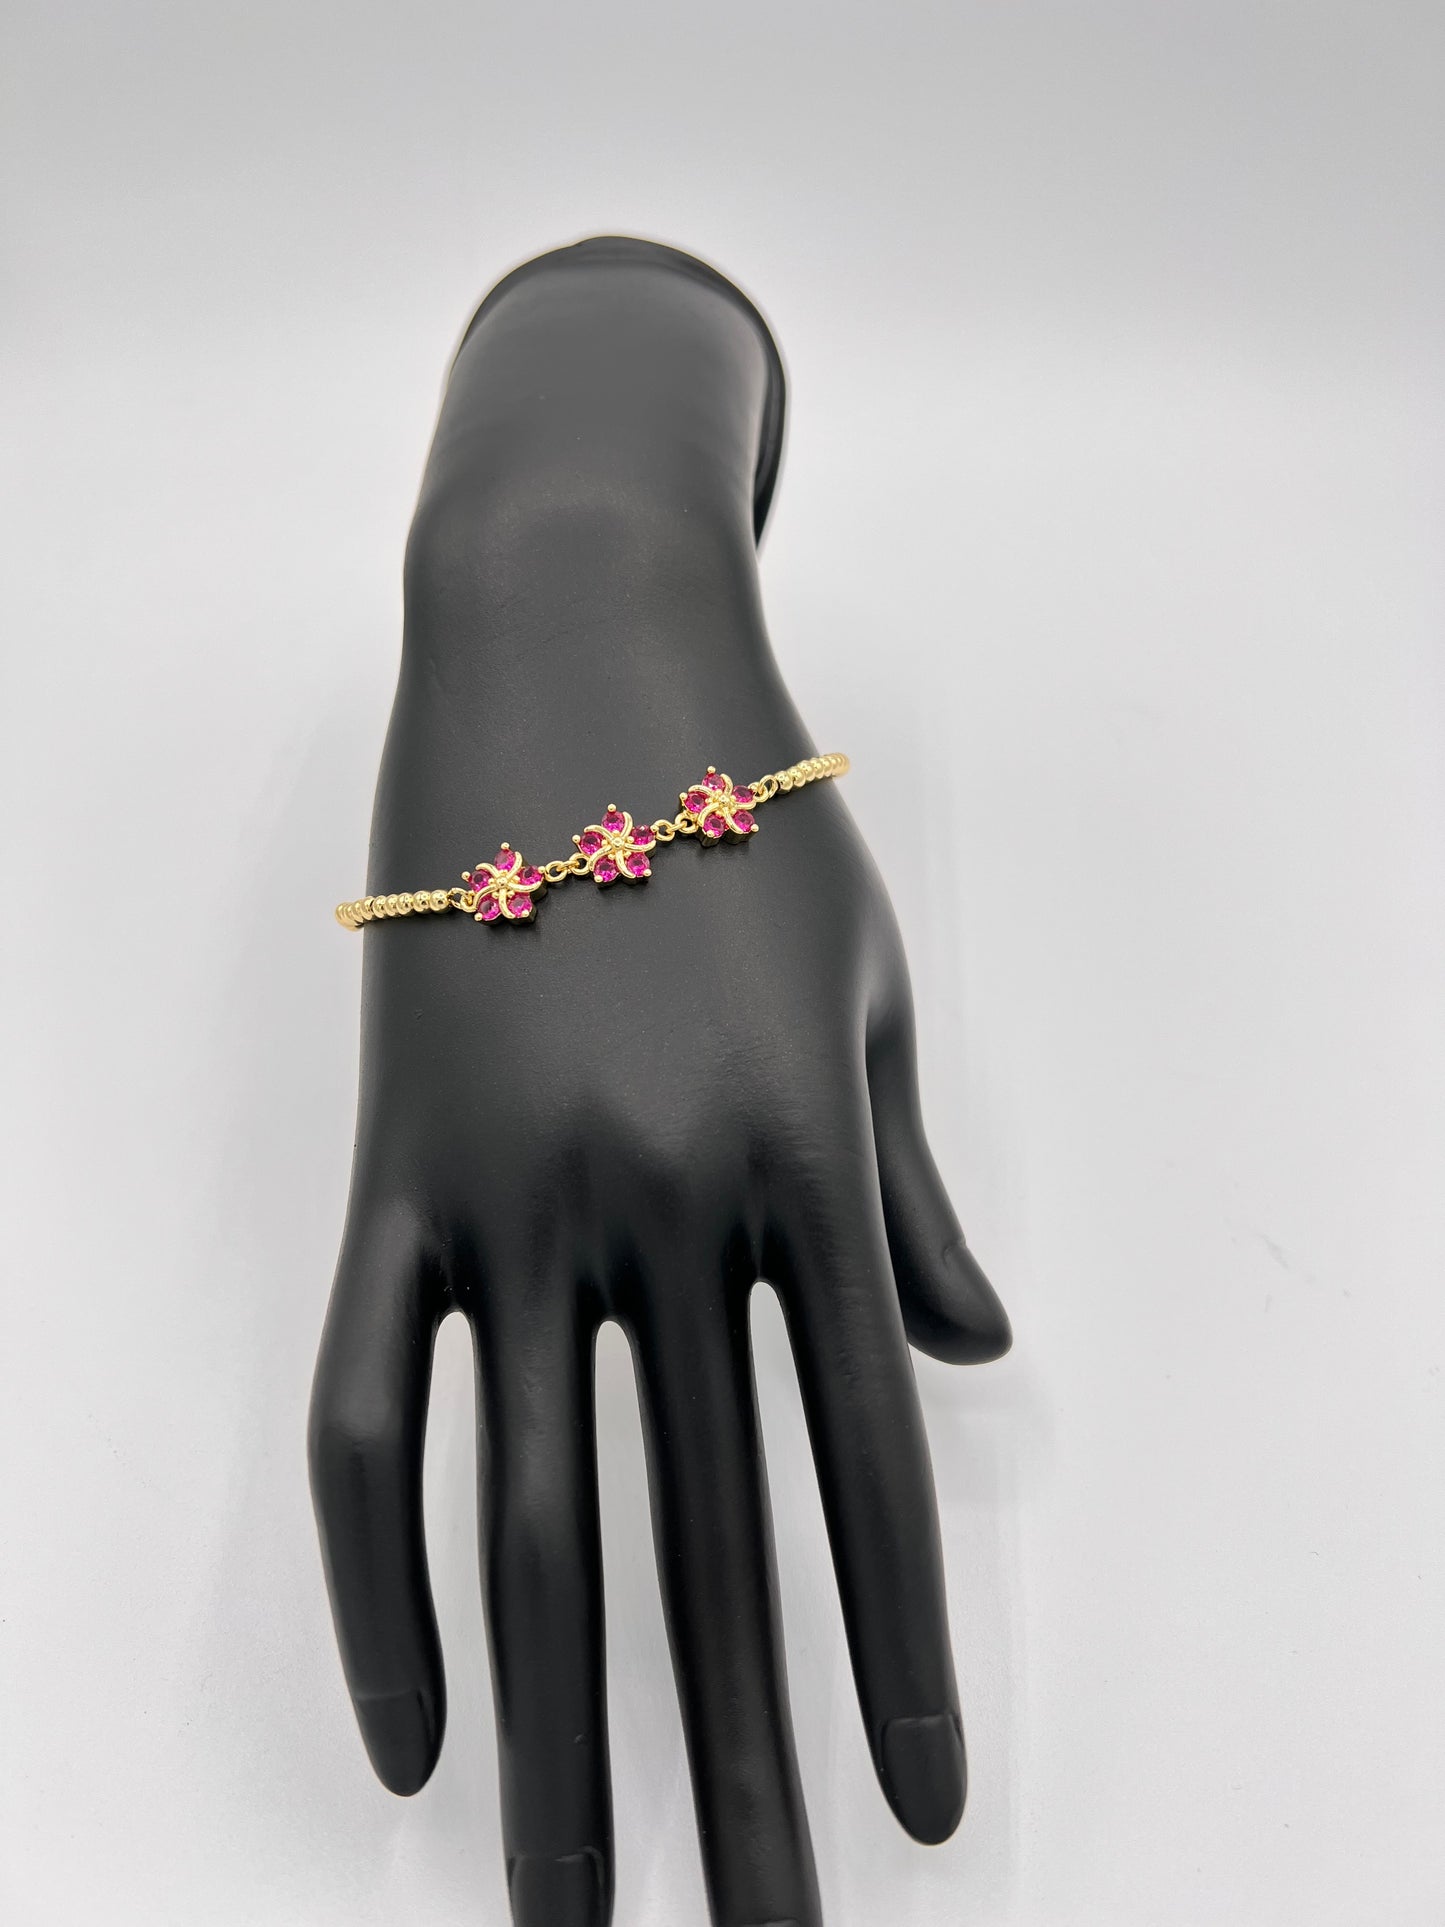 Trisha Ruby Pink Flower Gold Plated Bracelets One Free With Order $100 Or More